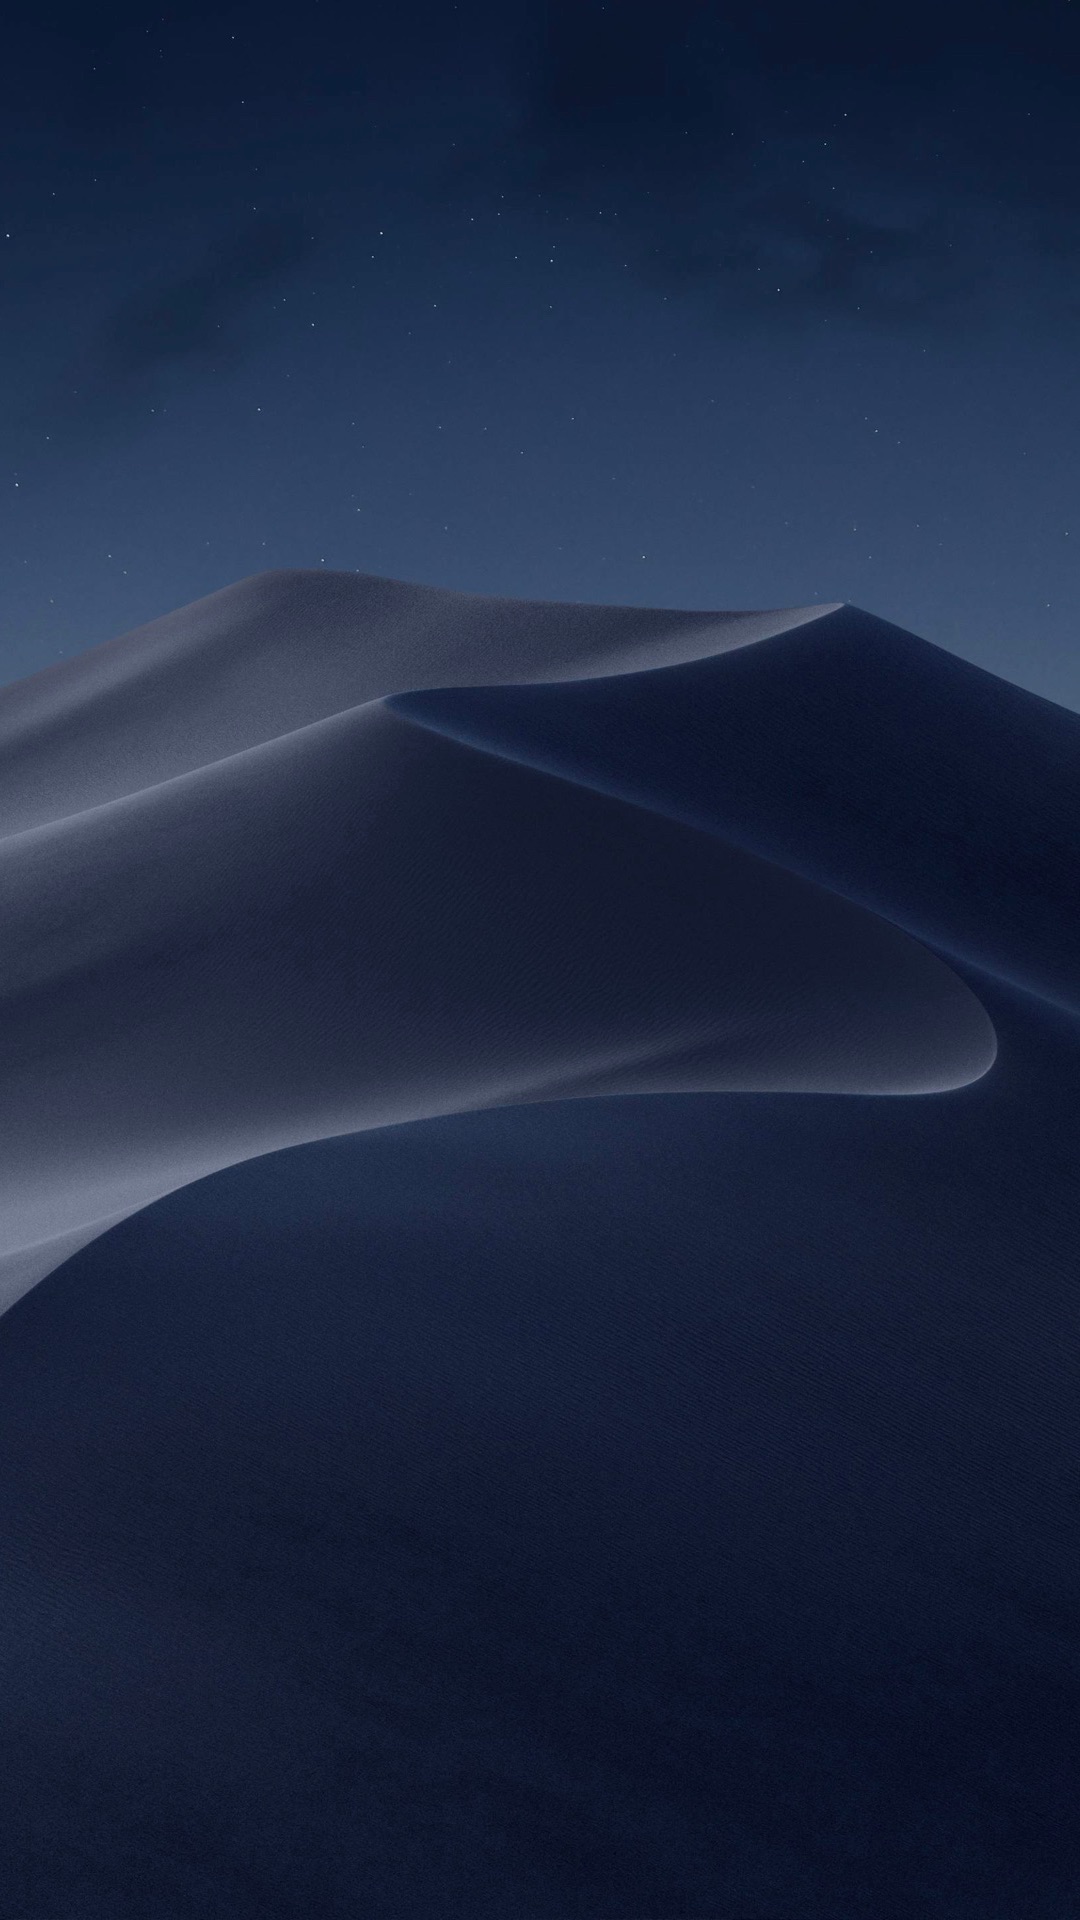 Wallpaper Weekends Macos Mojave Wallpapers For Iphone Ipad And